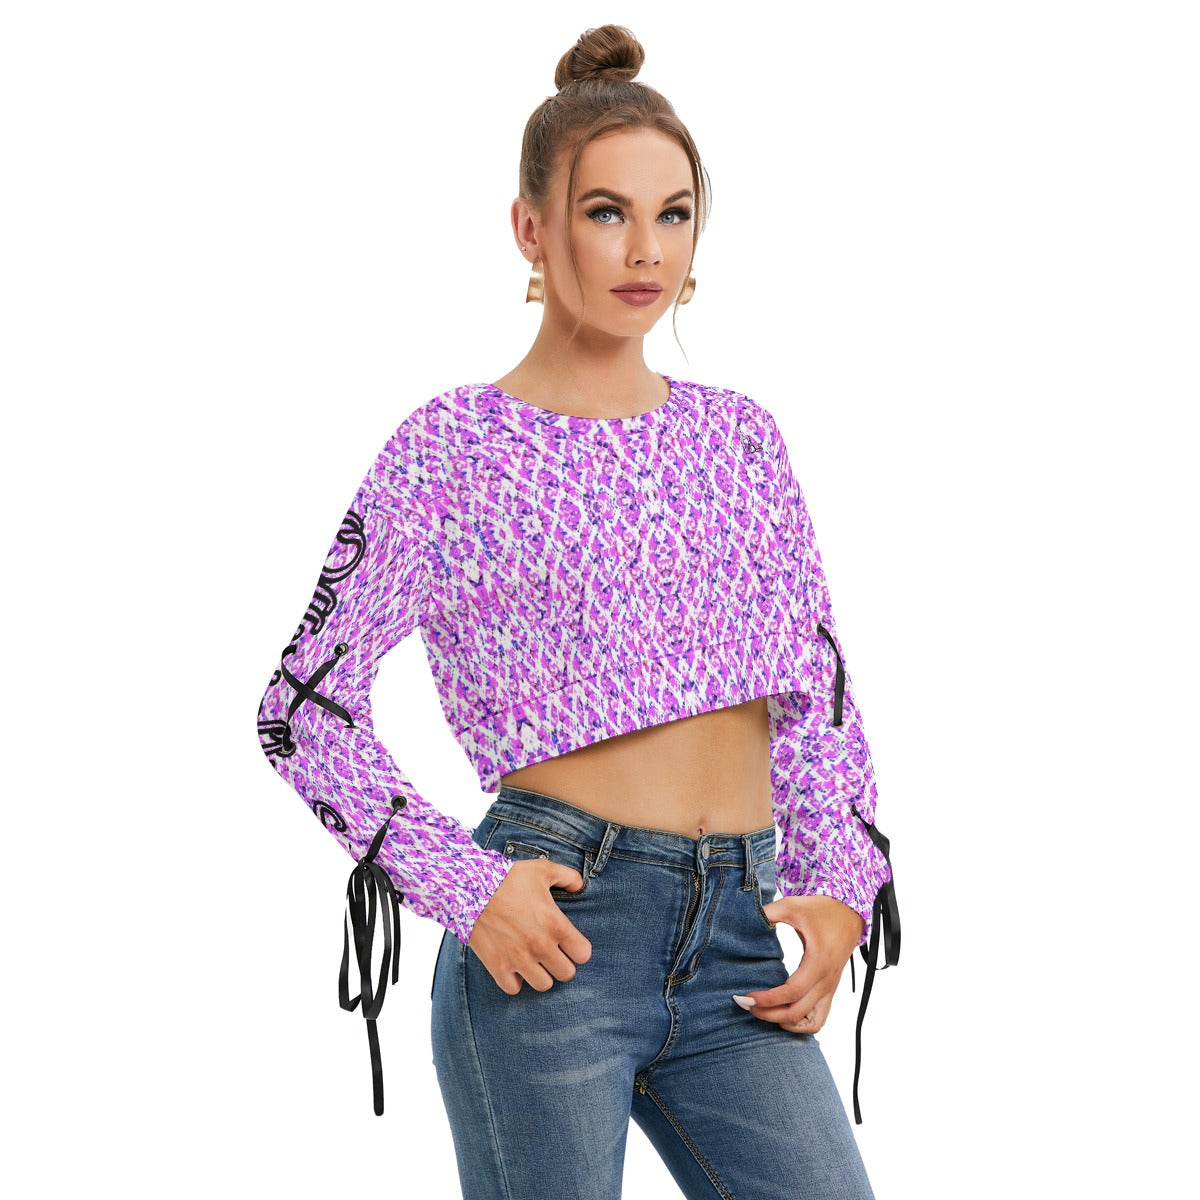 Officially Sexy Pink Stitched FHC Women's Long Sleeve Cropped Sweatshirt With Lace up Sleeves Right